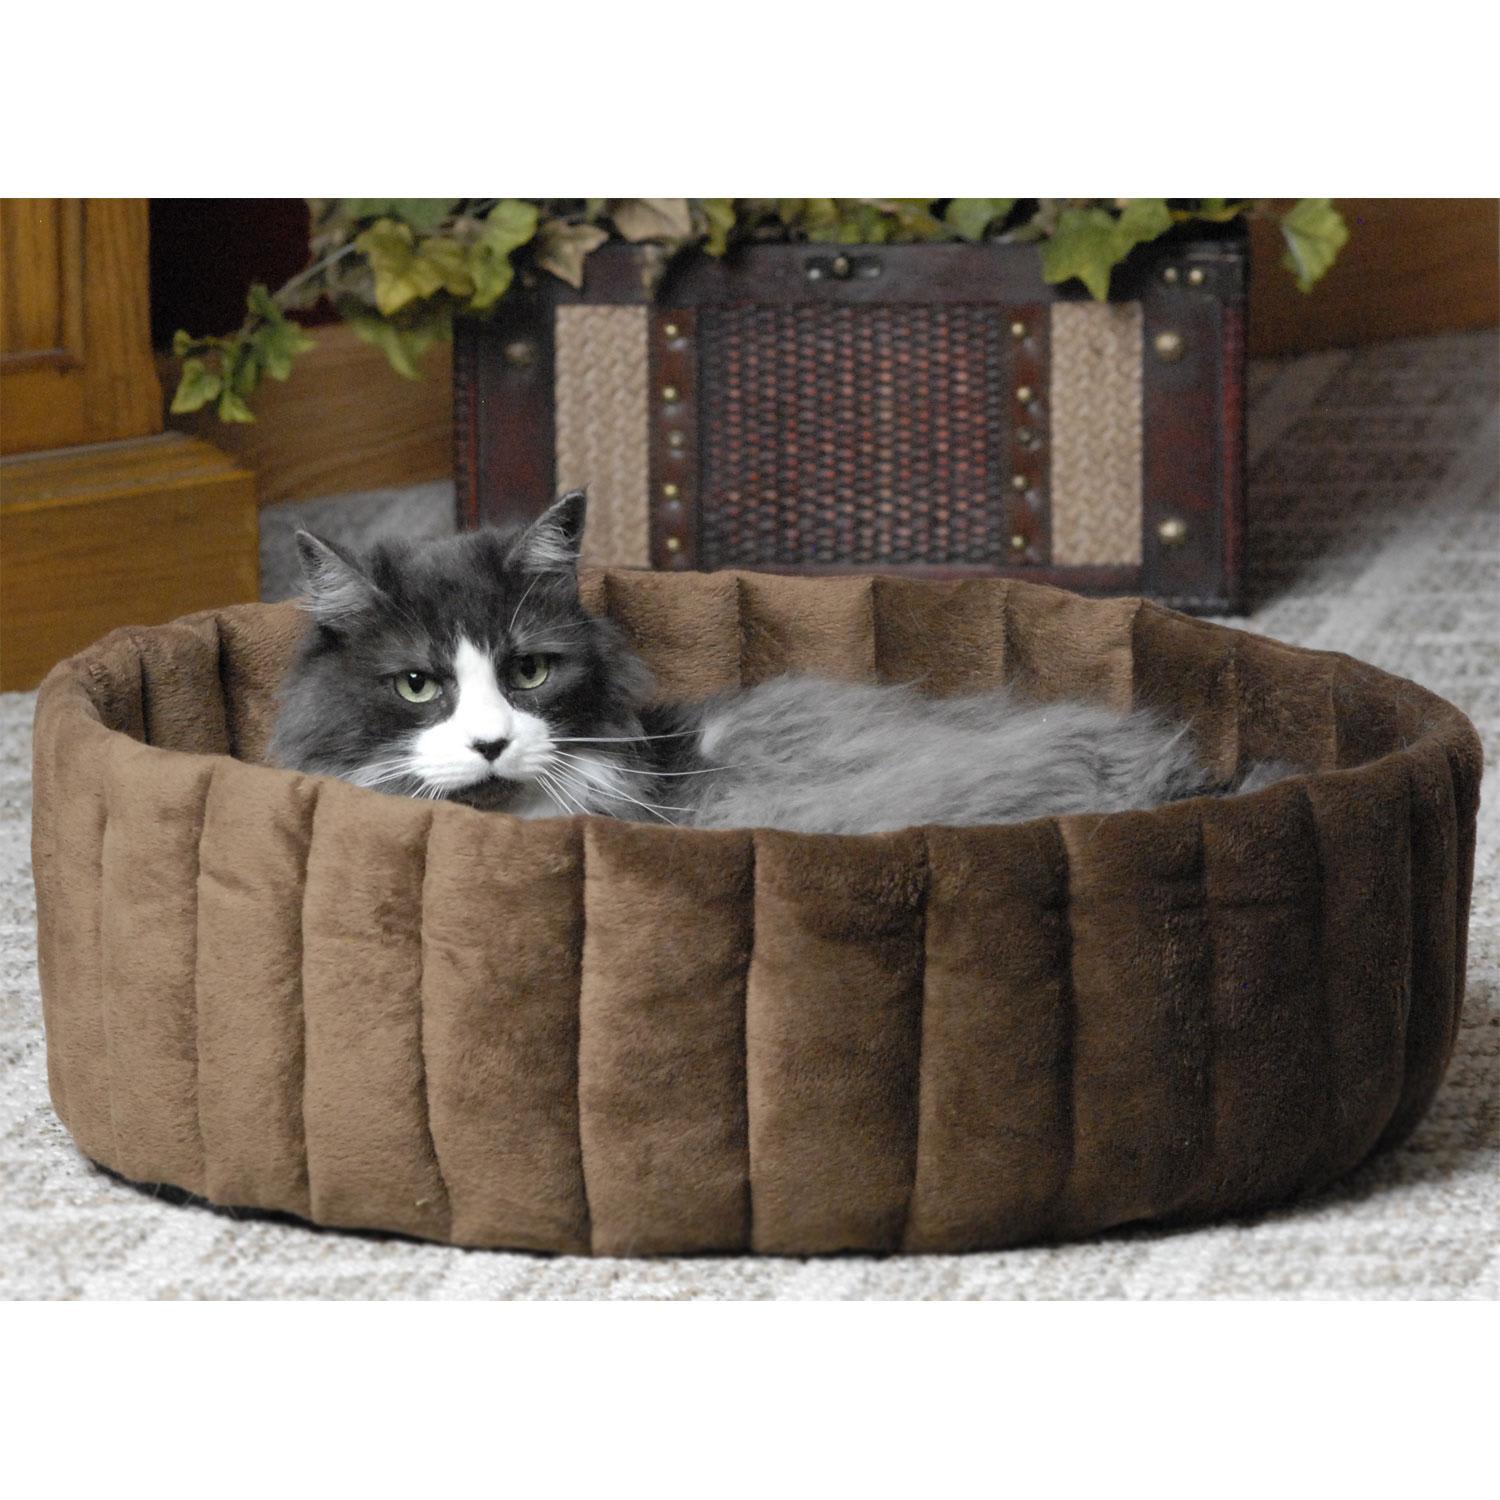 Photos - Cat Bed / House K&H Kitty Cup Tan & Mocha Cat Bed, 20" L x 20" W, Large, Brown / Tan 1 